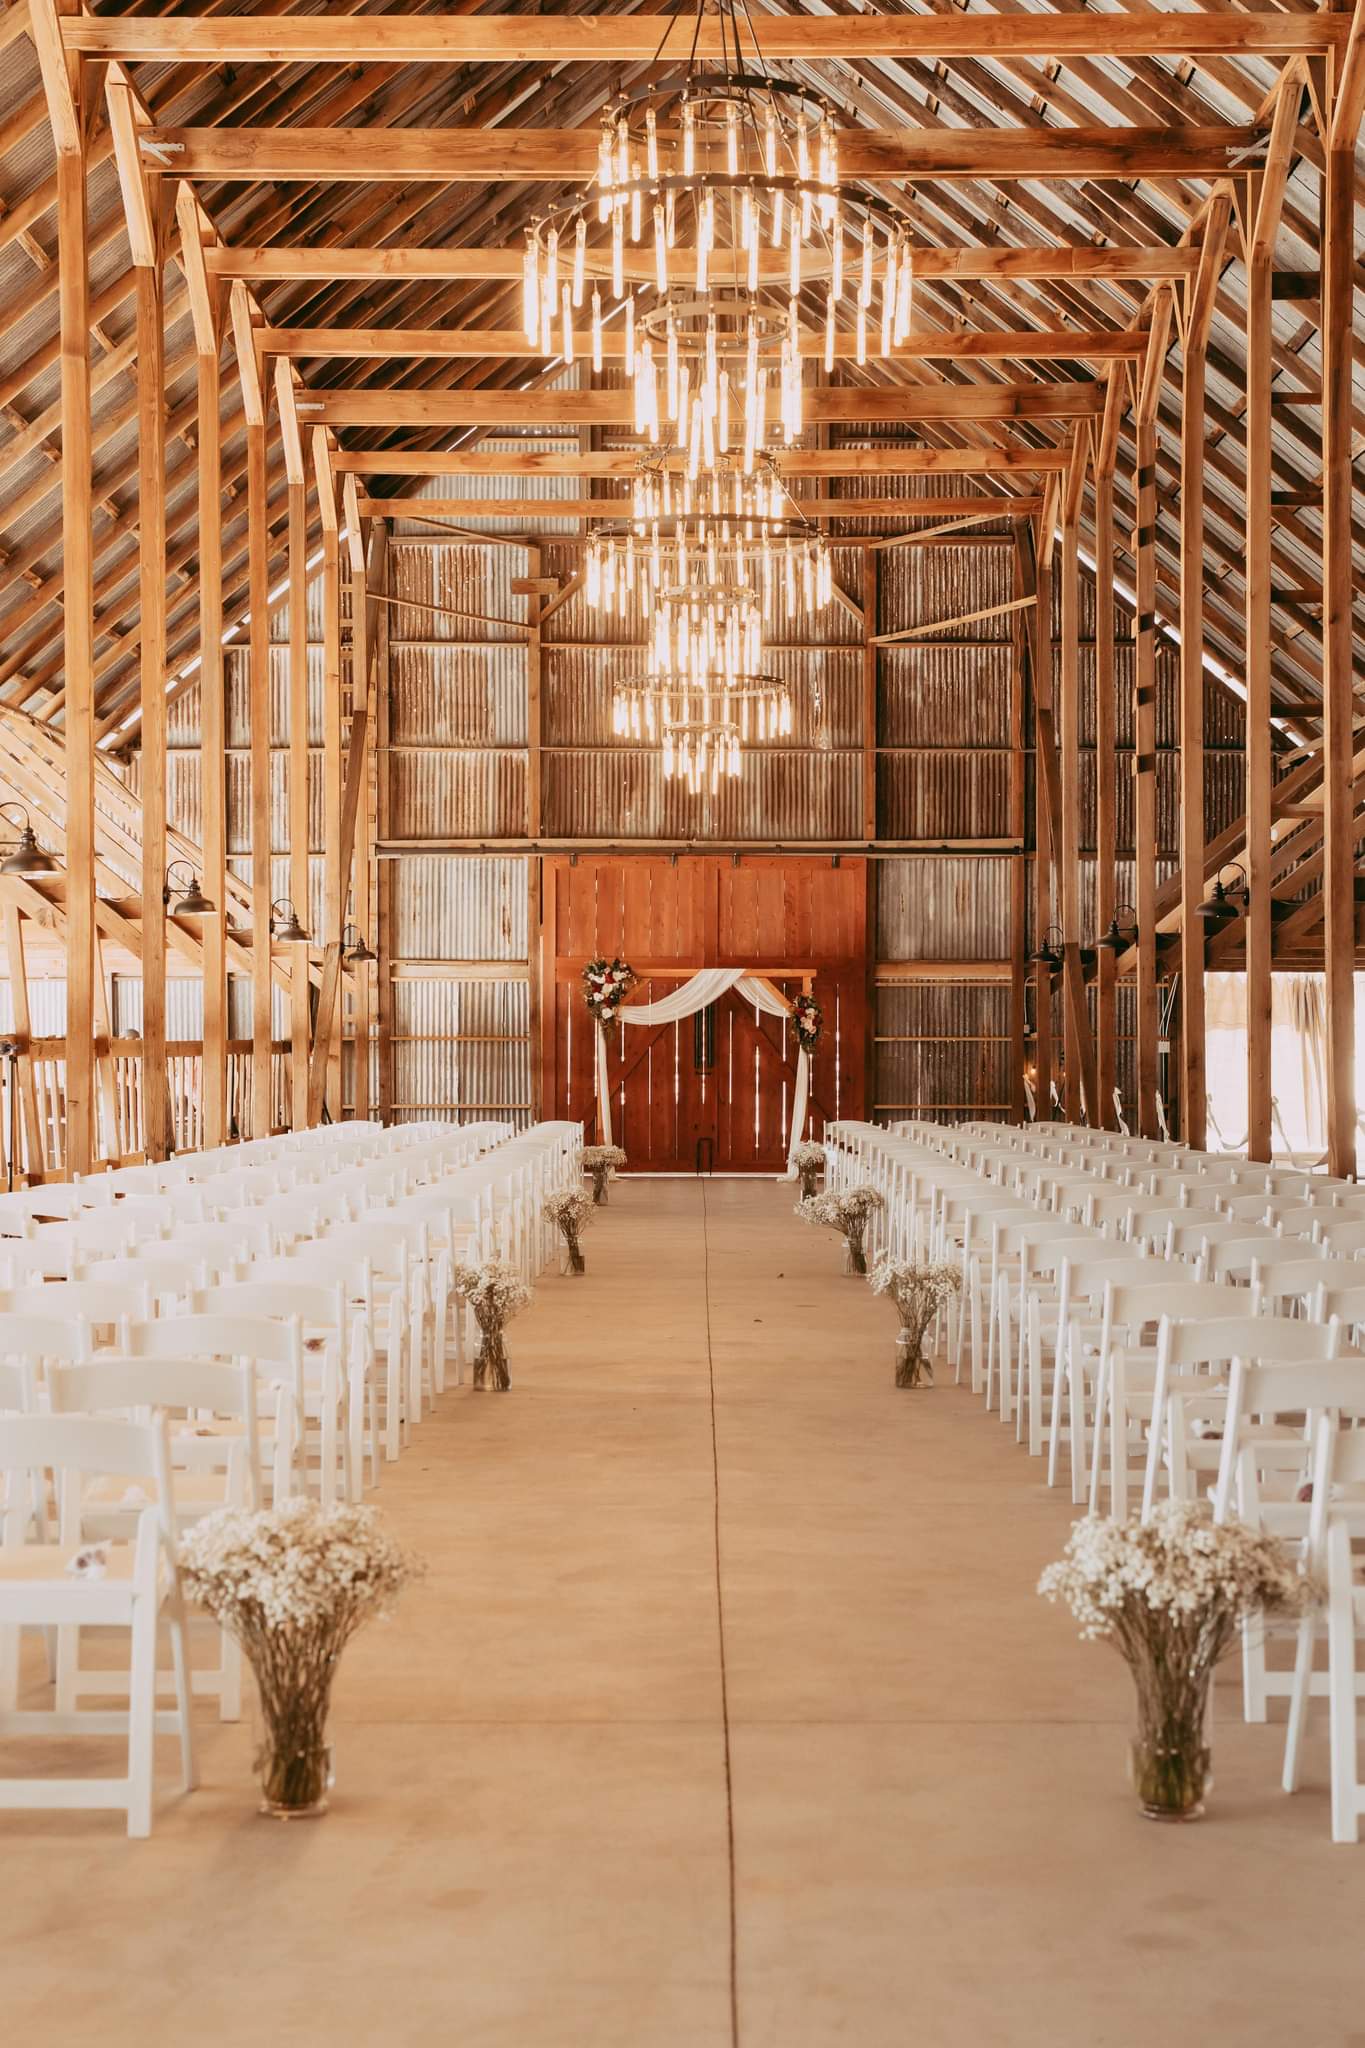 The inside of the old hay barn